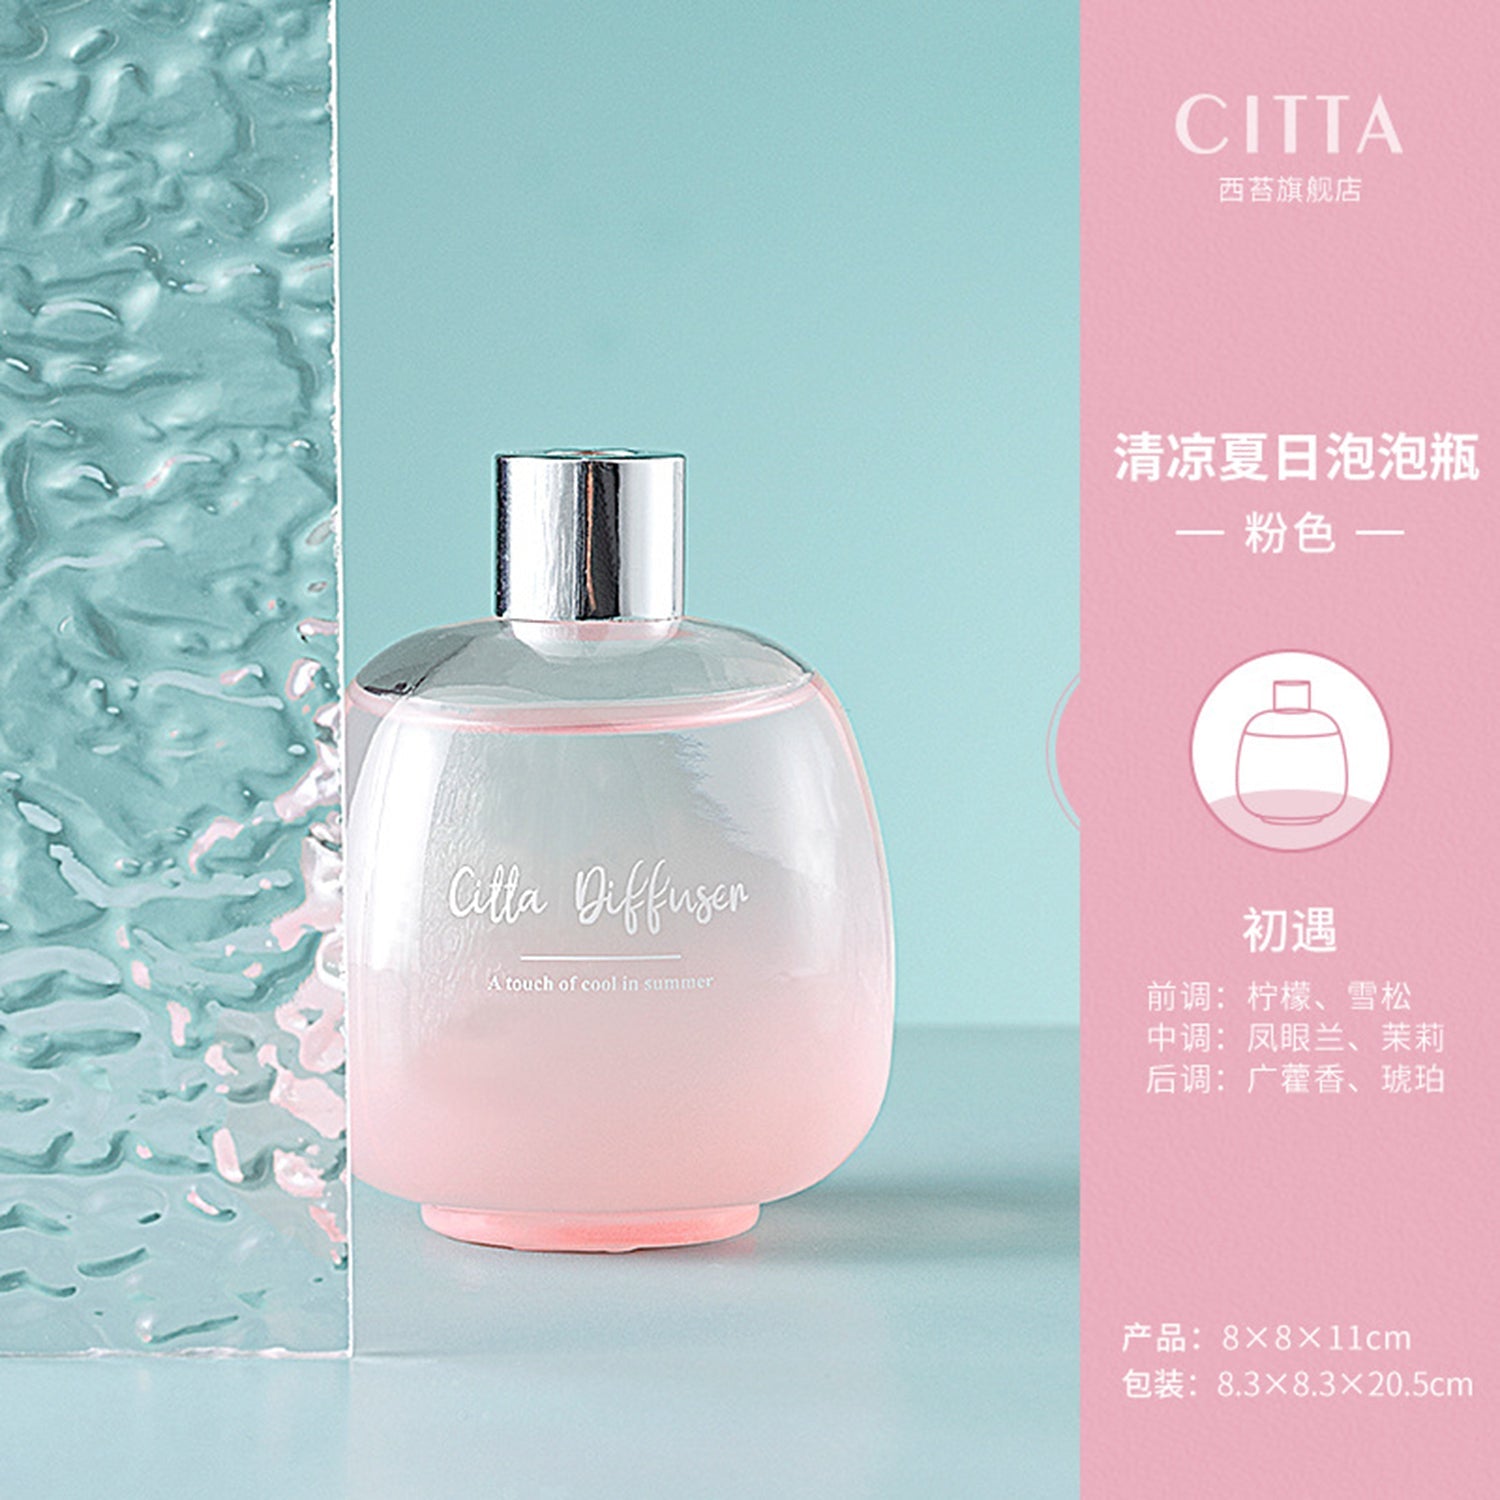 CITTA Cool Summer Series Reed Diffuser Aromatherapy 200ML Premium Essential Oil with Reed Stick Reed Diffuser CITTA Pink / Encounter 